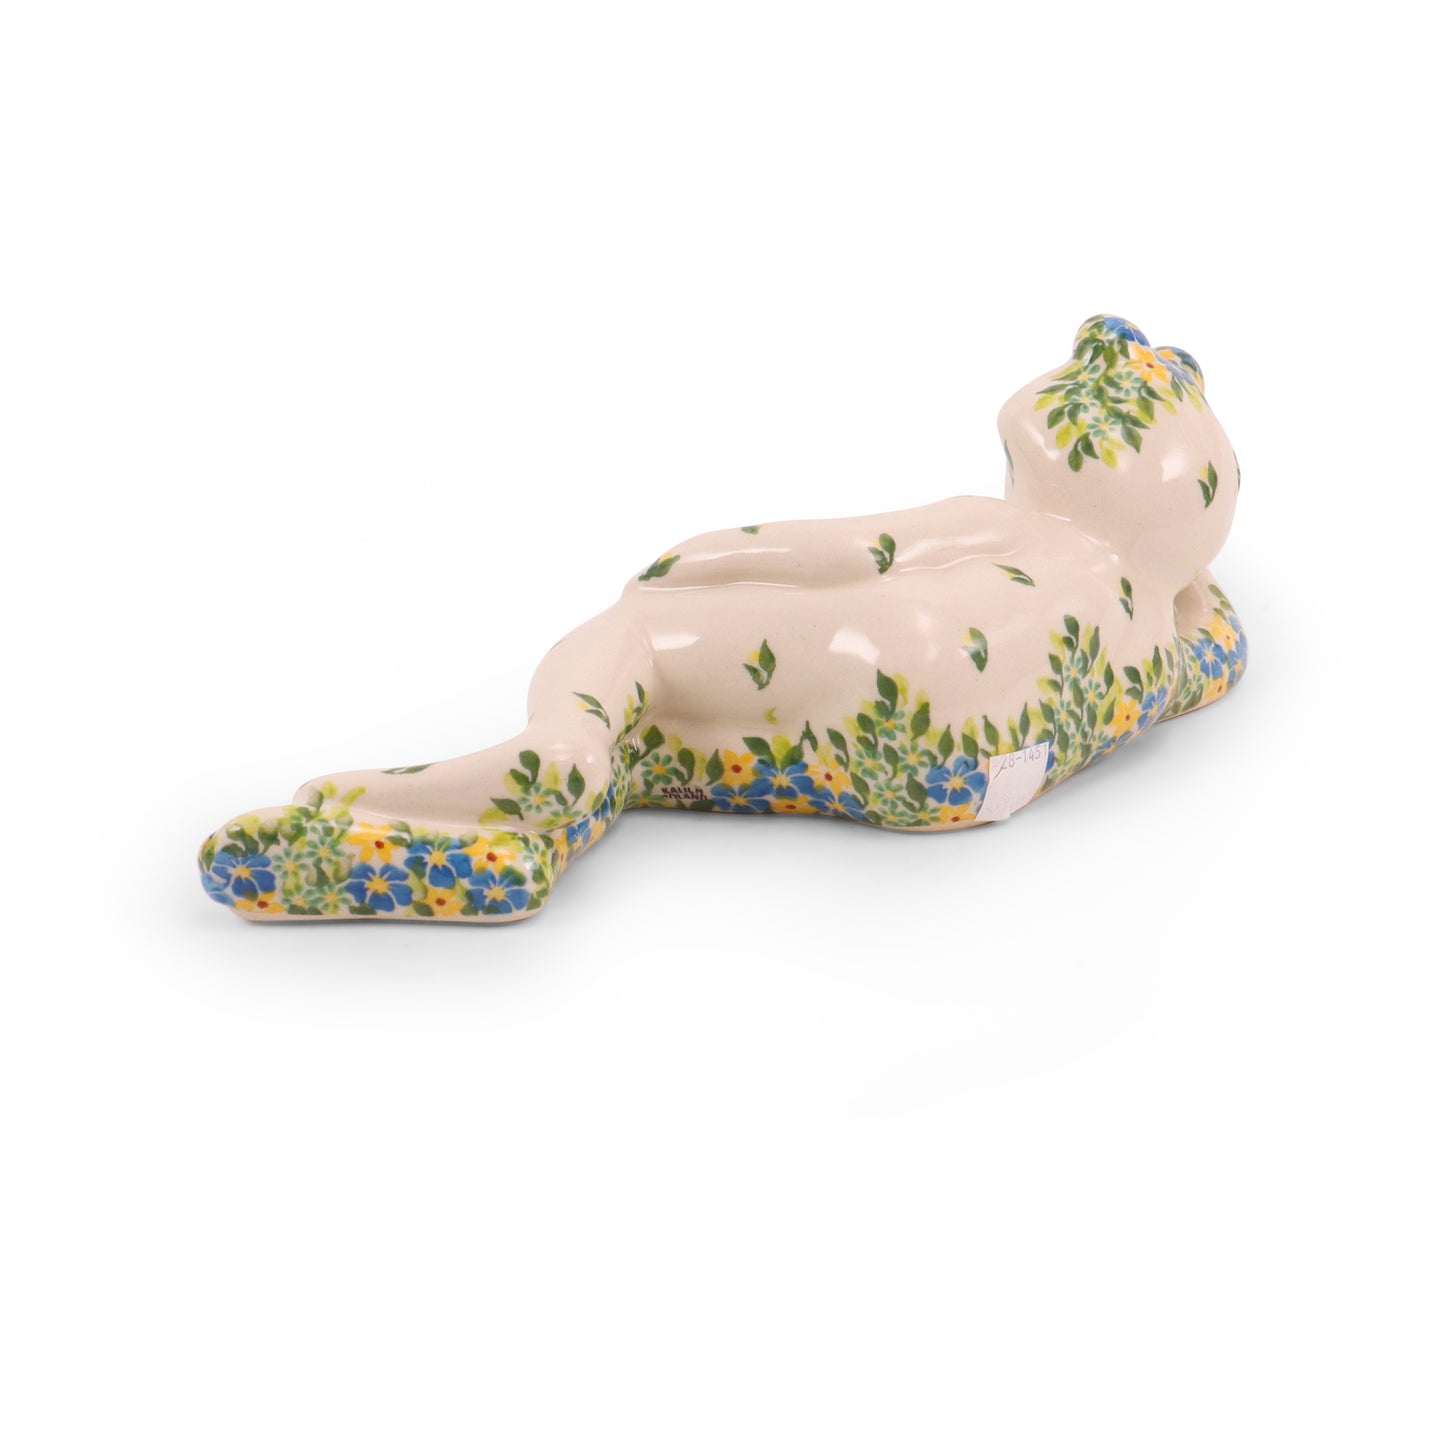 10.5" Lounging Frog Figurine. Pattern: Spring Picnic